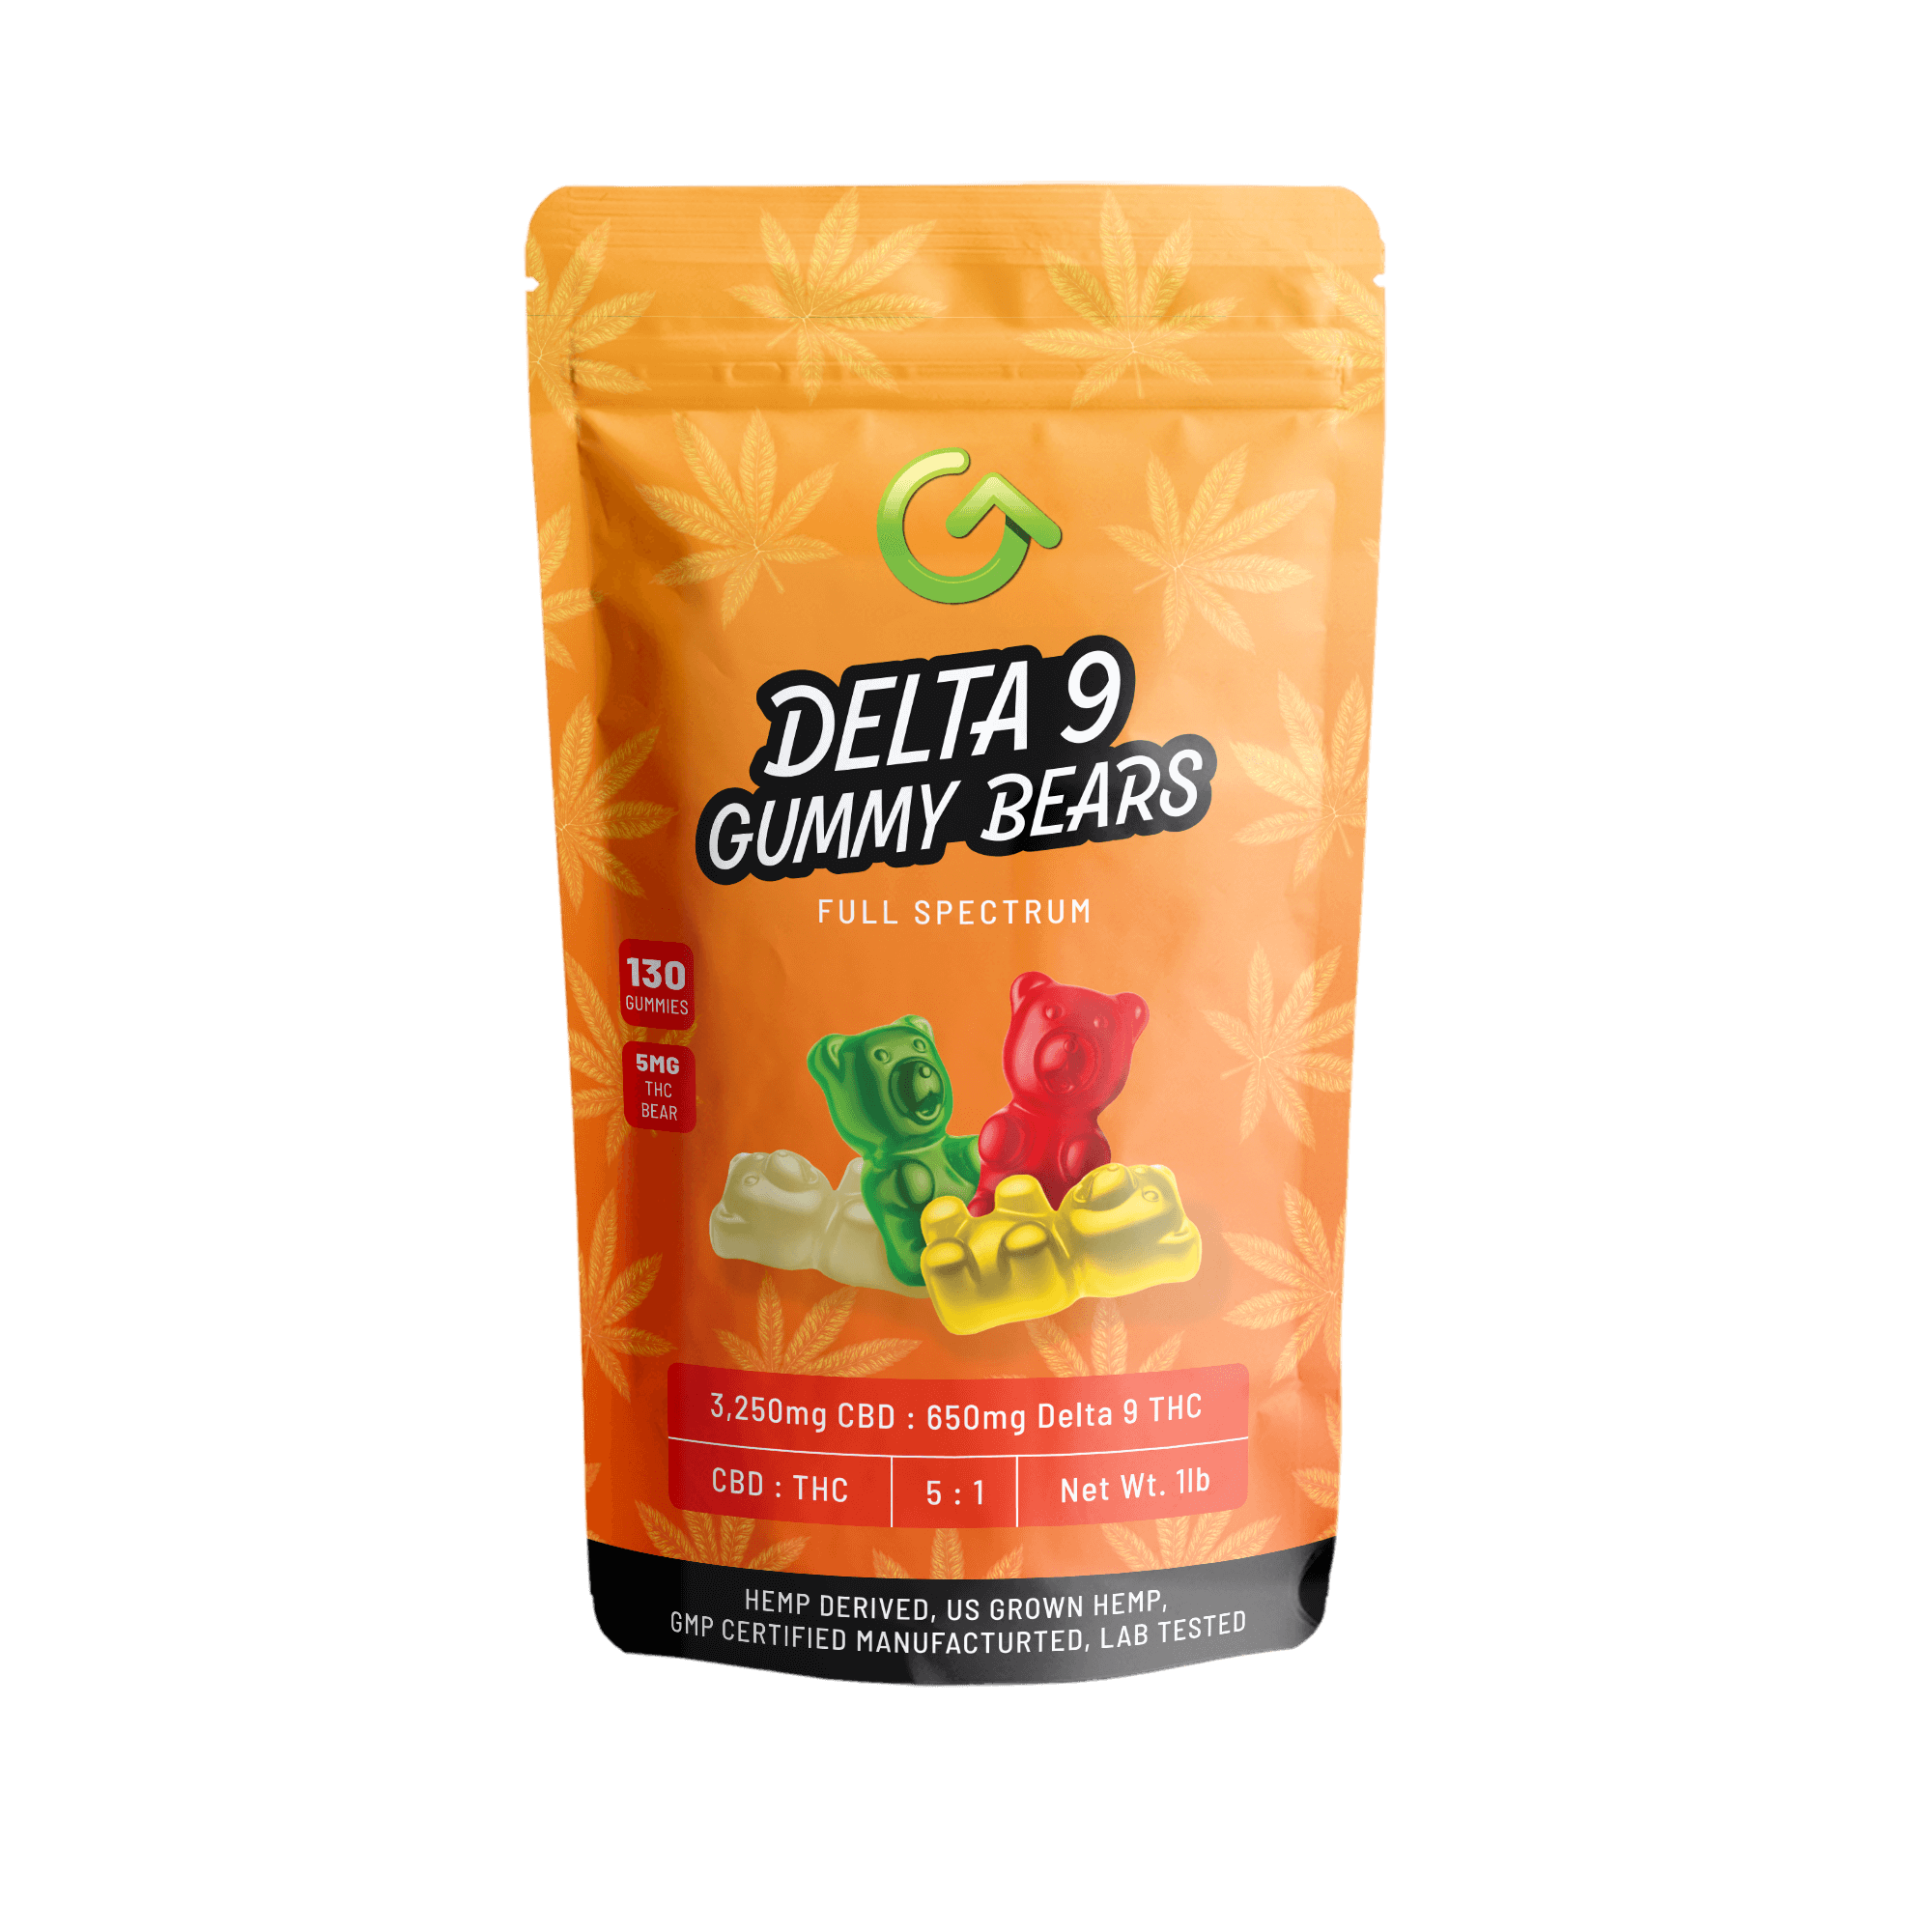 5mg Delta 9 gummy bears come with 130 gummies per bag and mixed fruit flavors